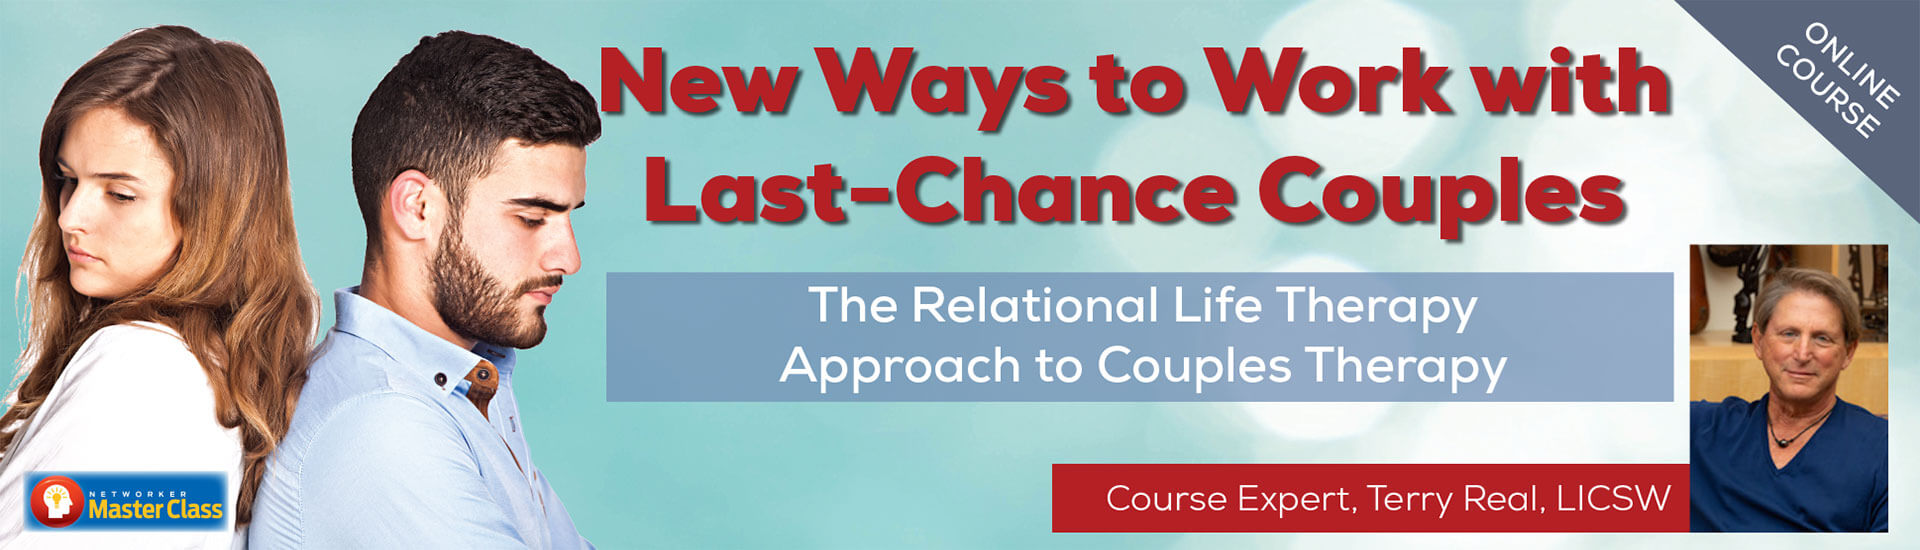 Terry Real – New Ways to Work with Last-Chance Couples with TRTRLTATCT (1)